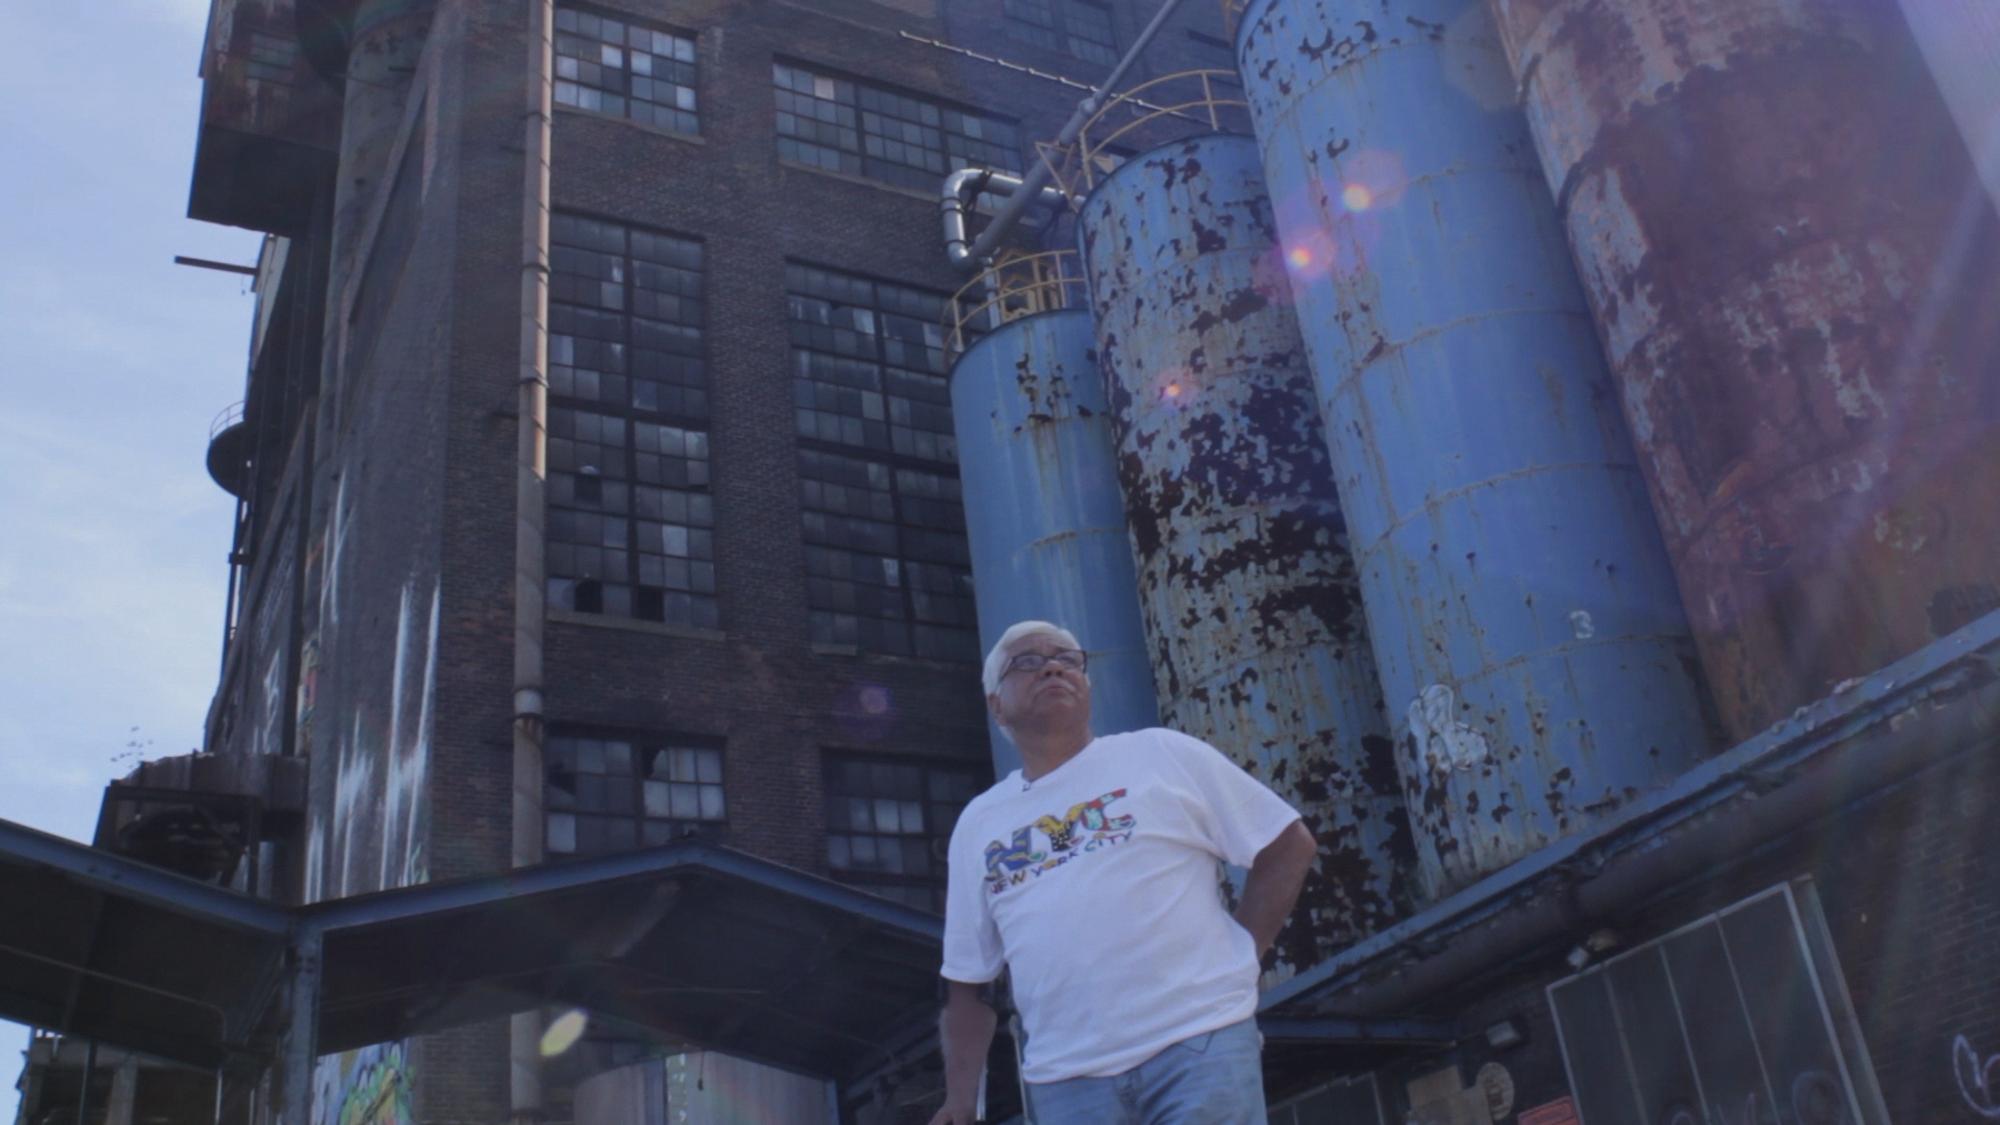 An older man (Frank Ortiz) wears a white shirt with the letters NYC on them and blue jeans stands in front of an industrial building, the Domino Sugar refinery.